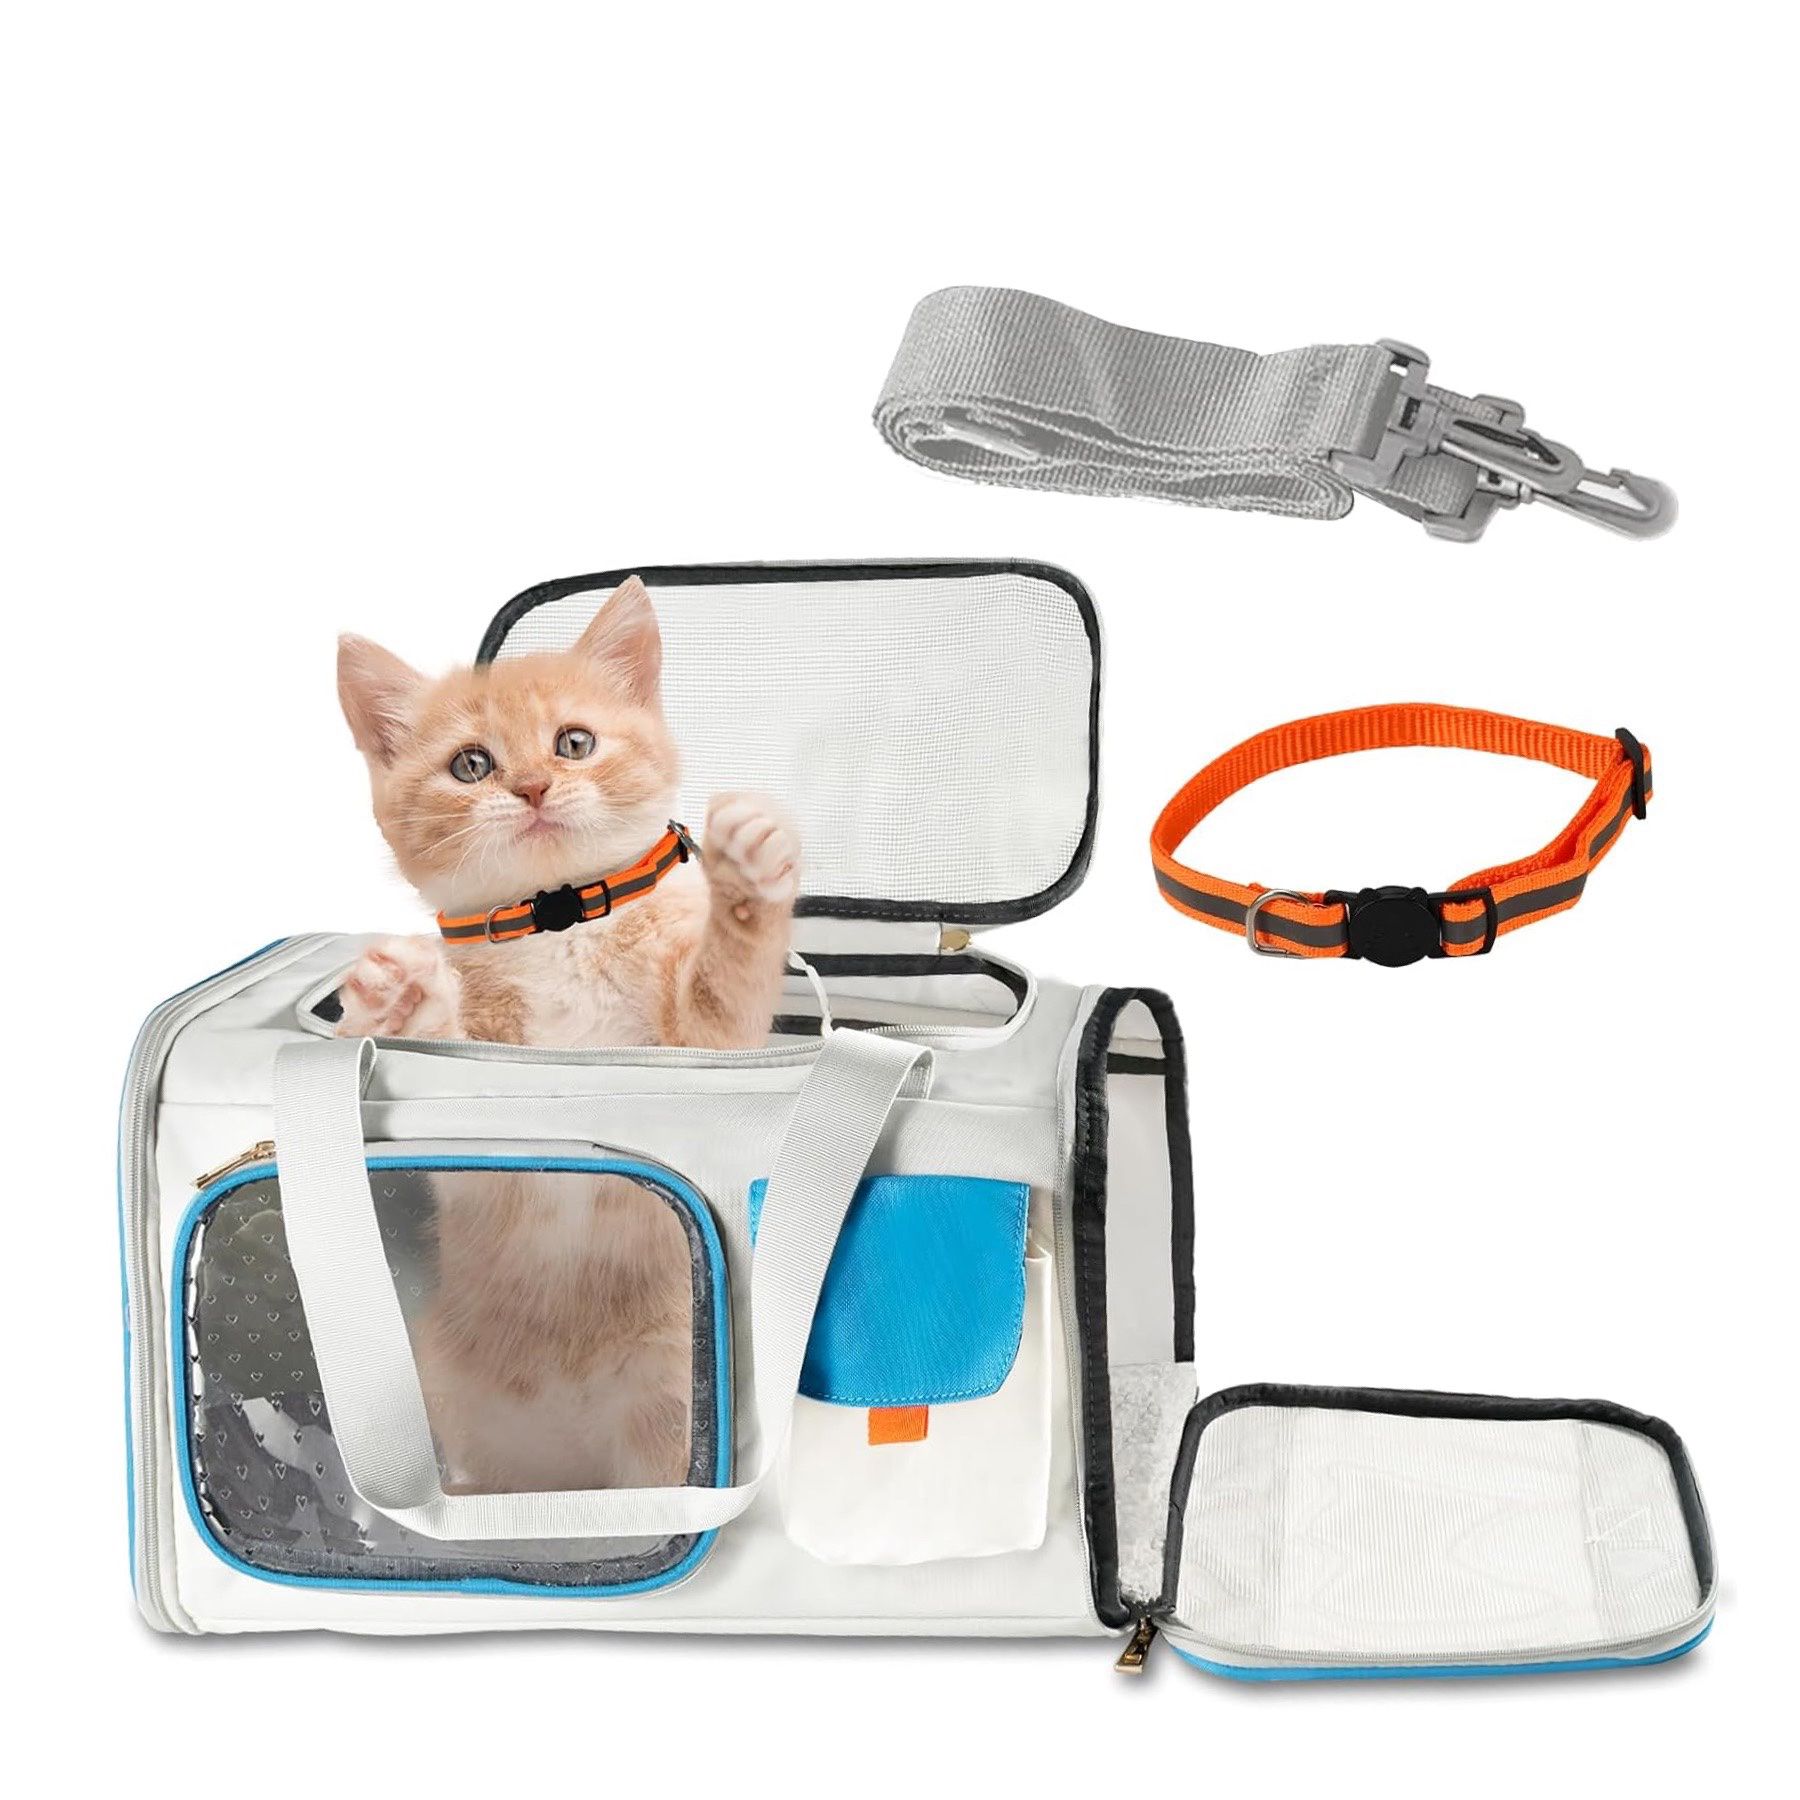 Airline Approved Pet Carrier Soft Sided Breathable and Foldable Soft Sided for Cat, Kitty, Puppy, or Small Pet